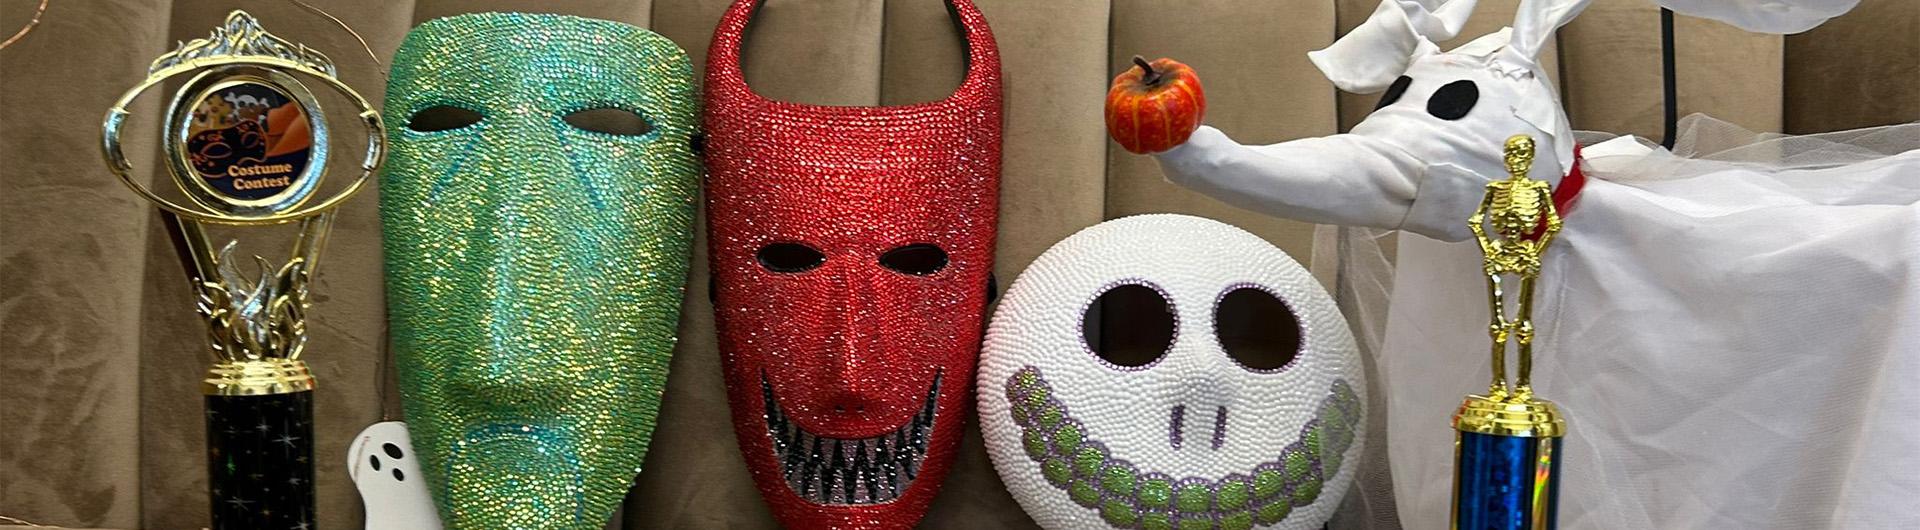 halloween masks and trophies